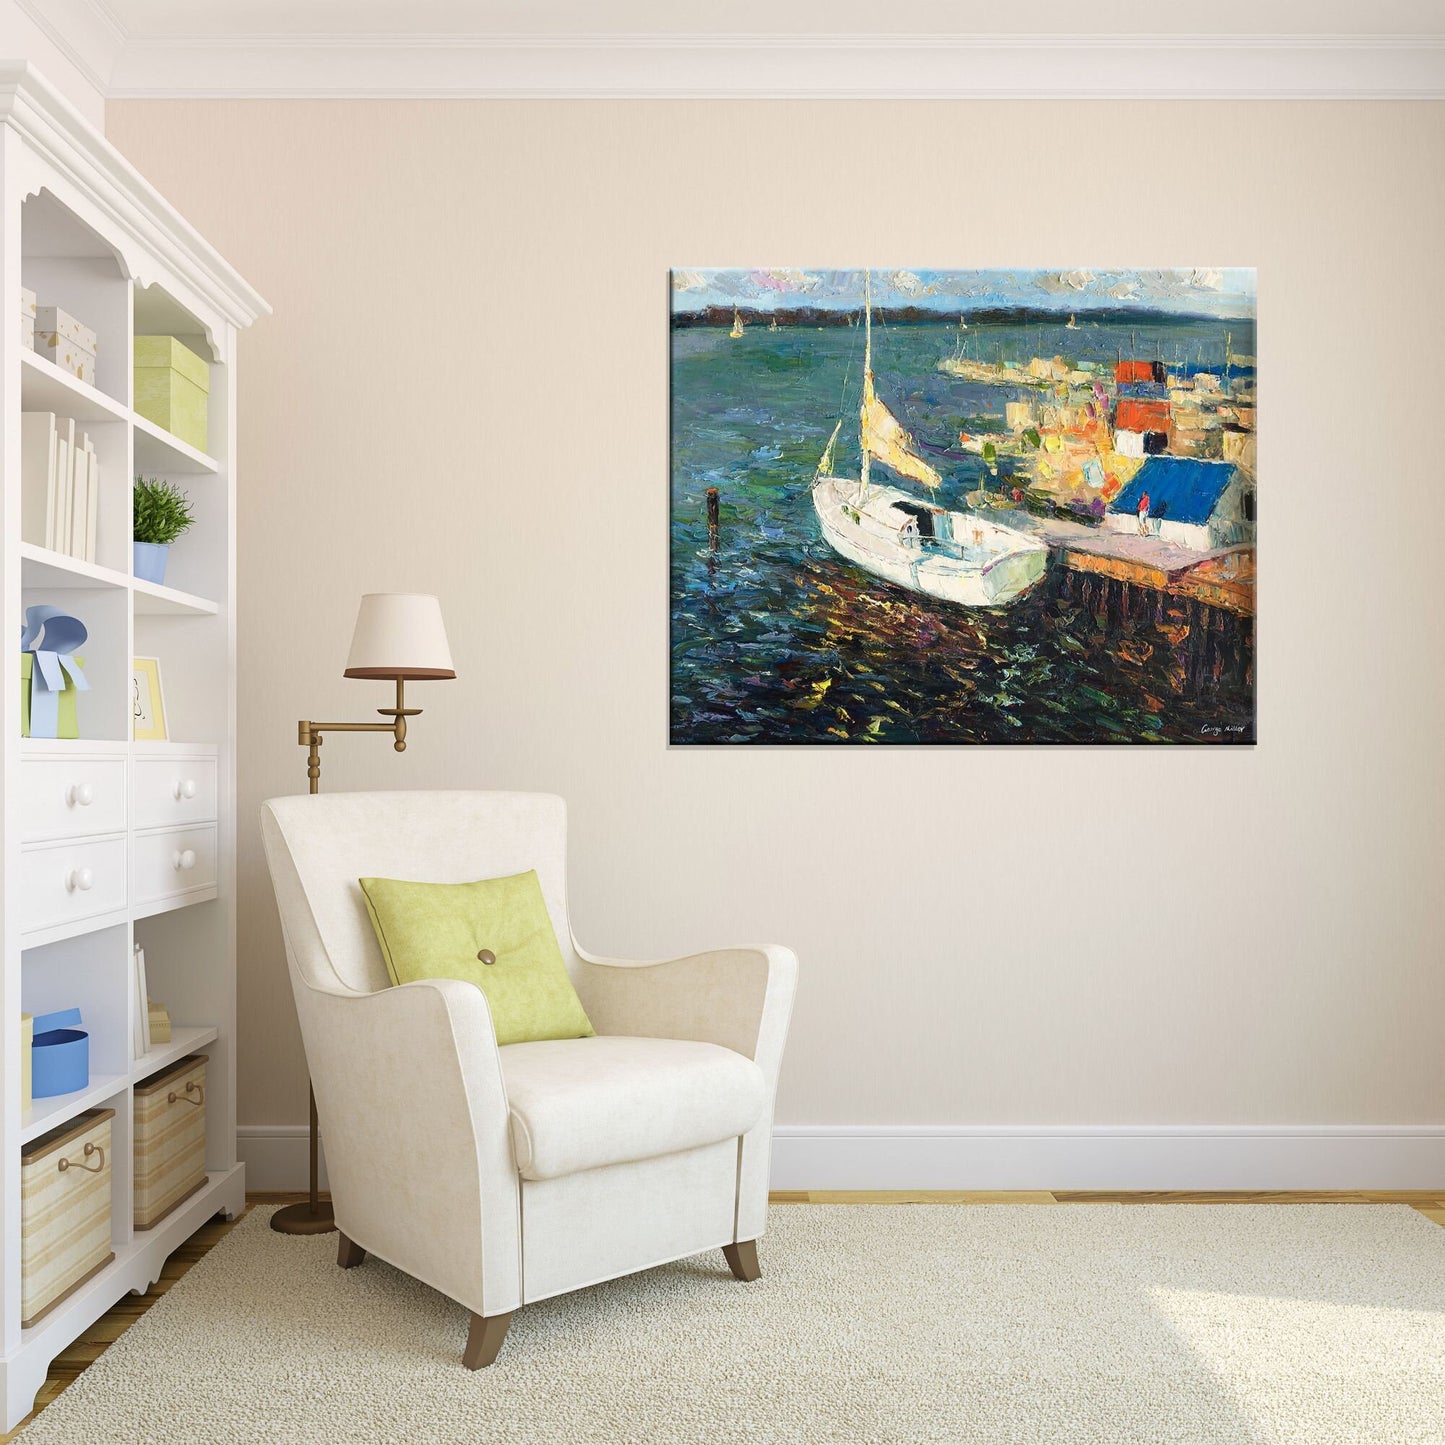 Original Oil Painting Finshing Boats At Sea, Seascape Oil Painting, Large Canvas Art, Handmade Painting, Modern Wall Art, Impasto Painting